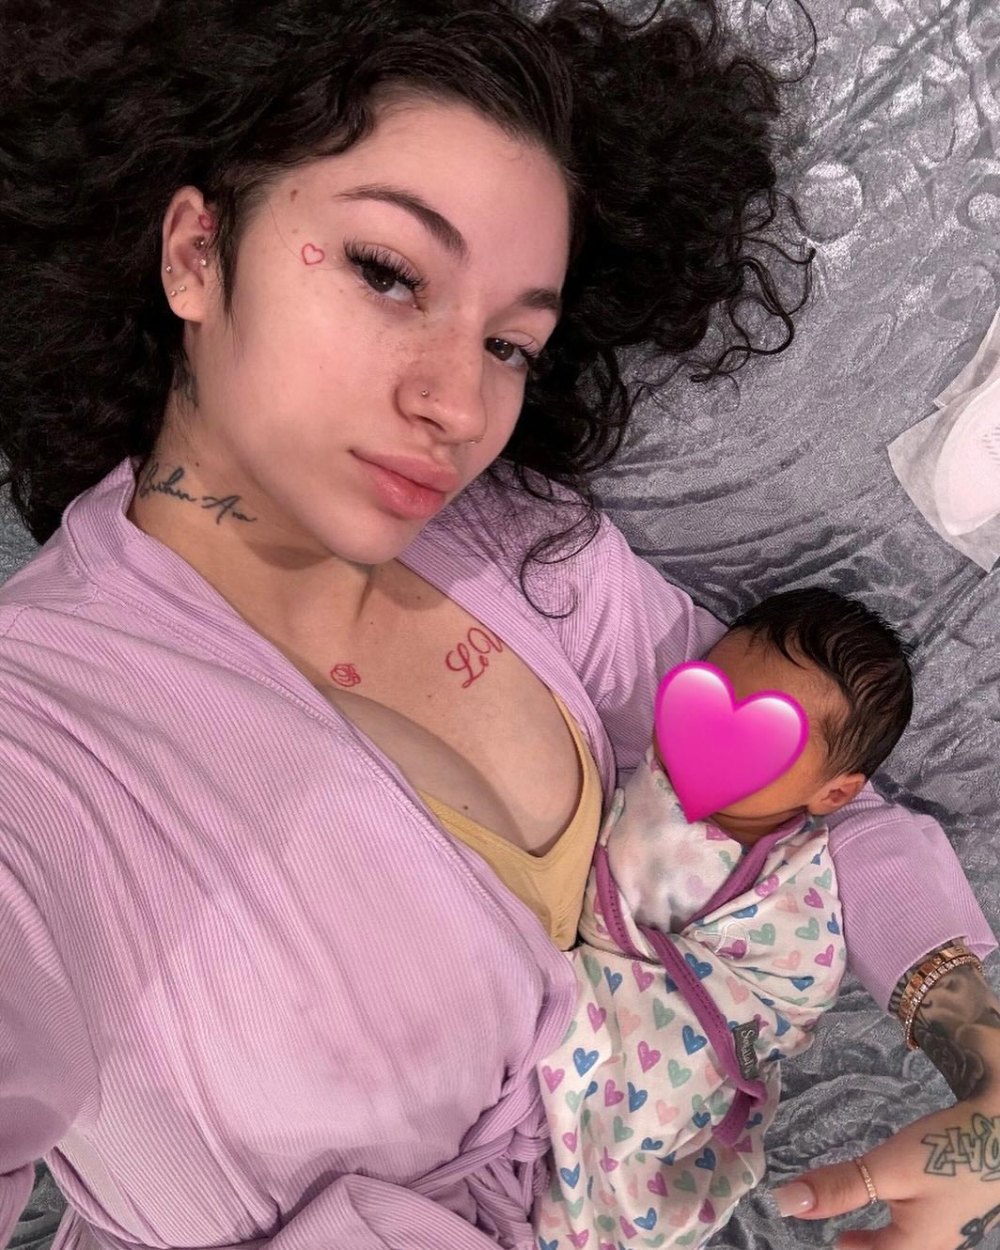 Bhad Bhabie Shares a New Photo of Her Newborn Daughter